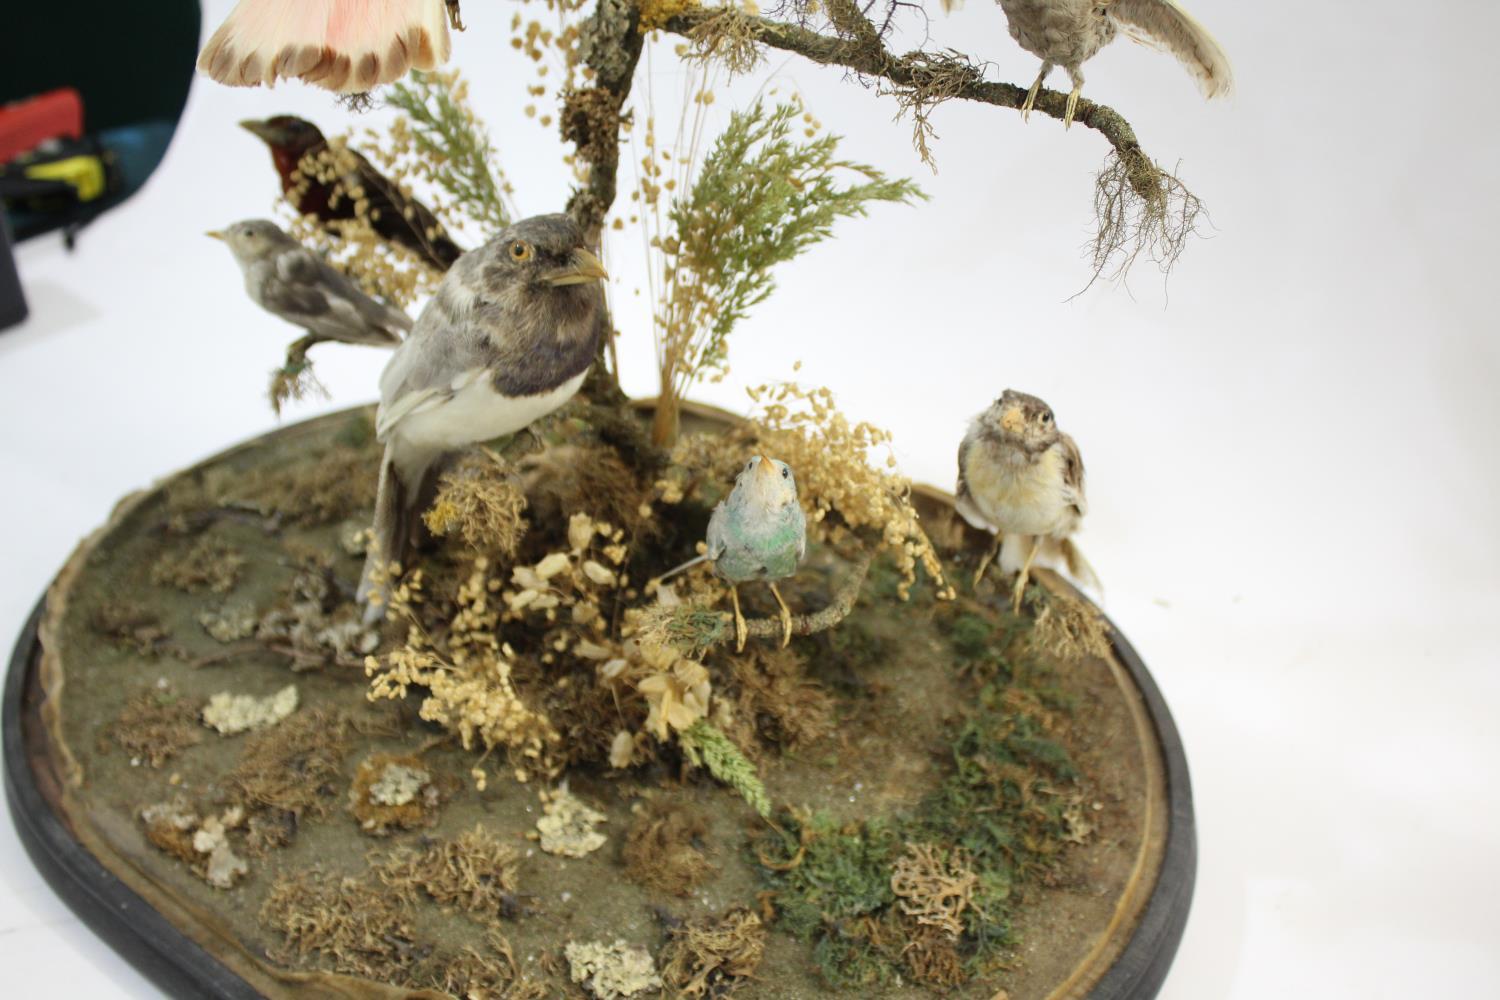 VICTORIAN CASED BIRDS & GLASS DOME - DIORAMA a large display of exotic stuffed birds including - Image 9 of 10